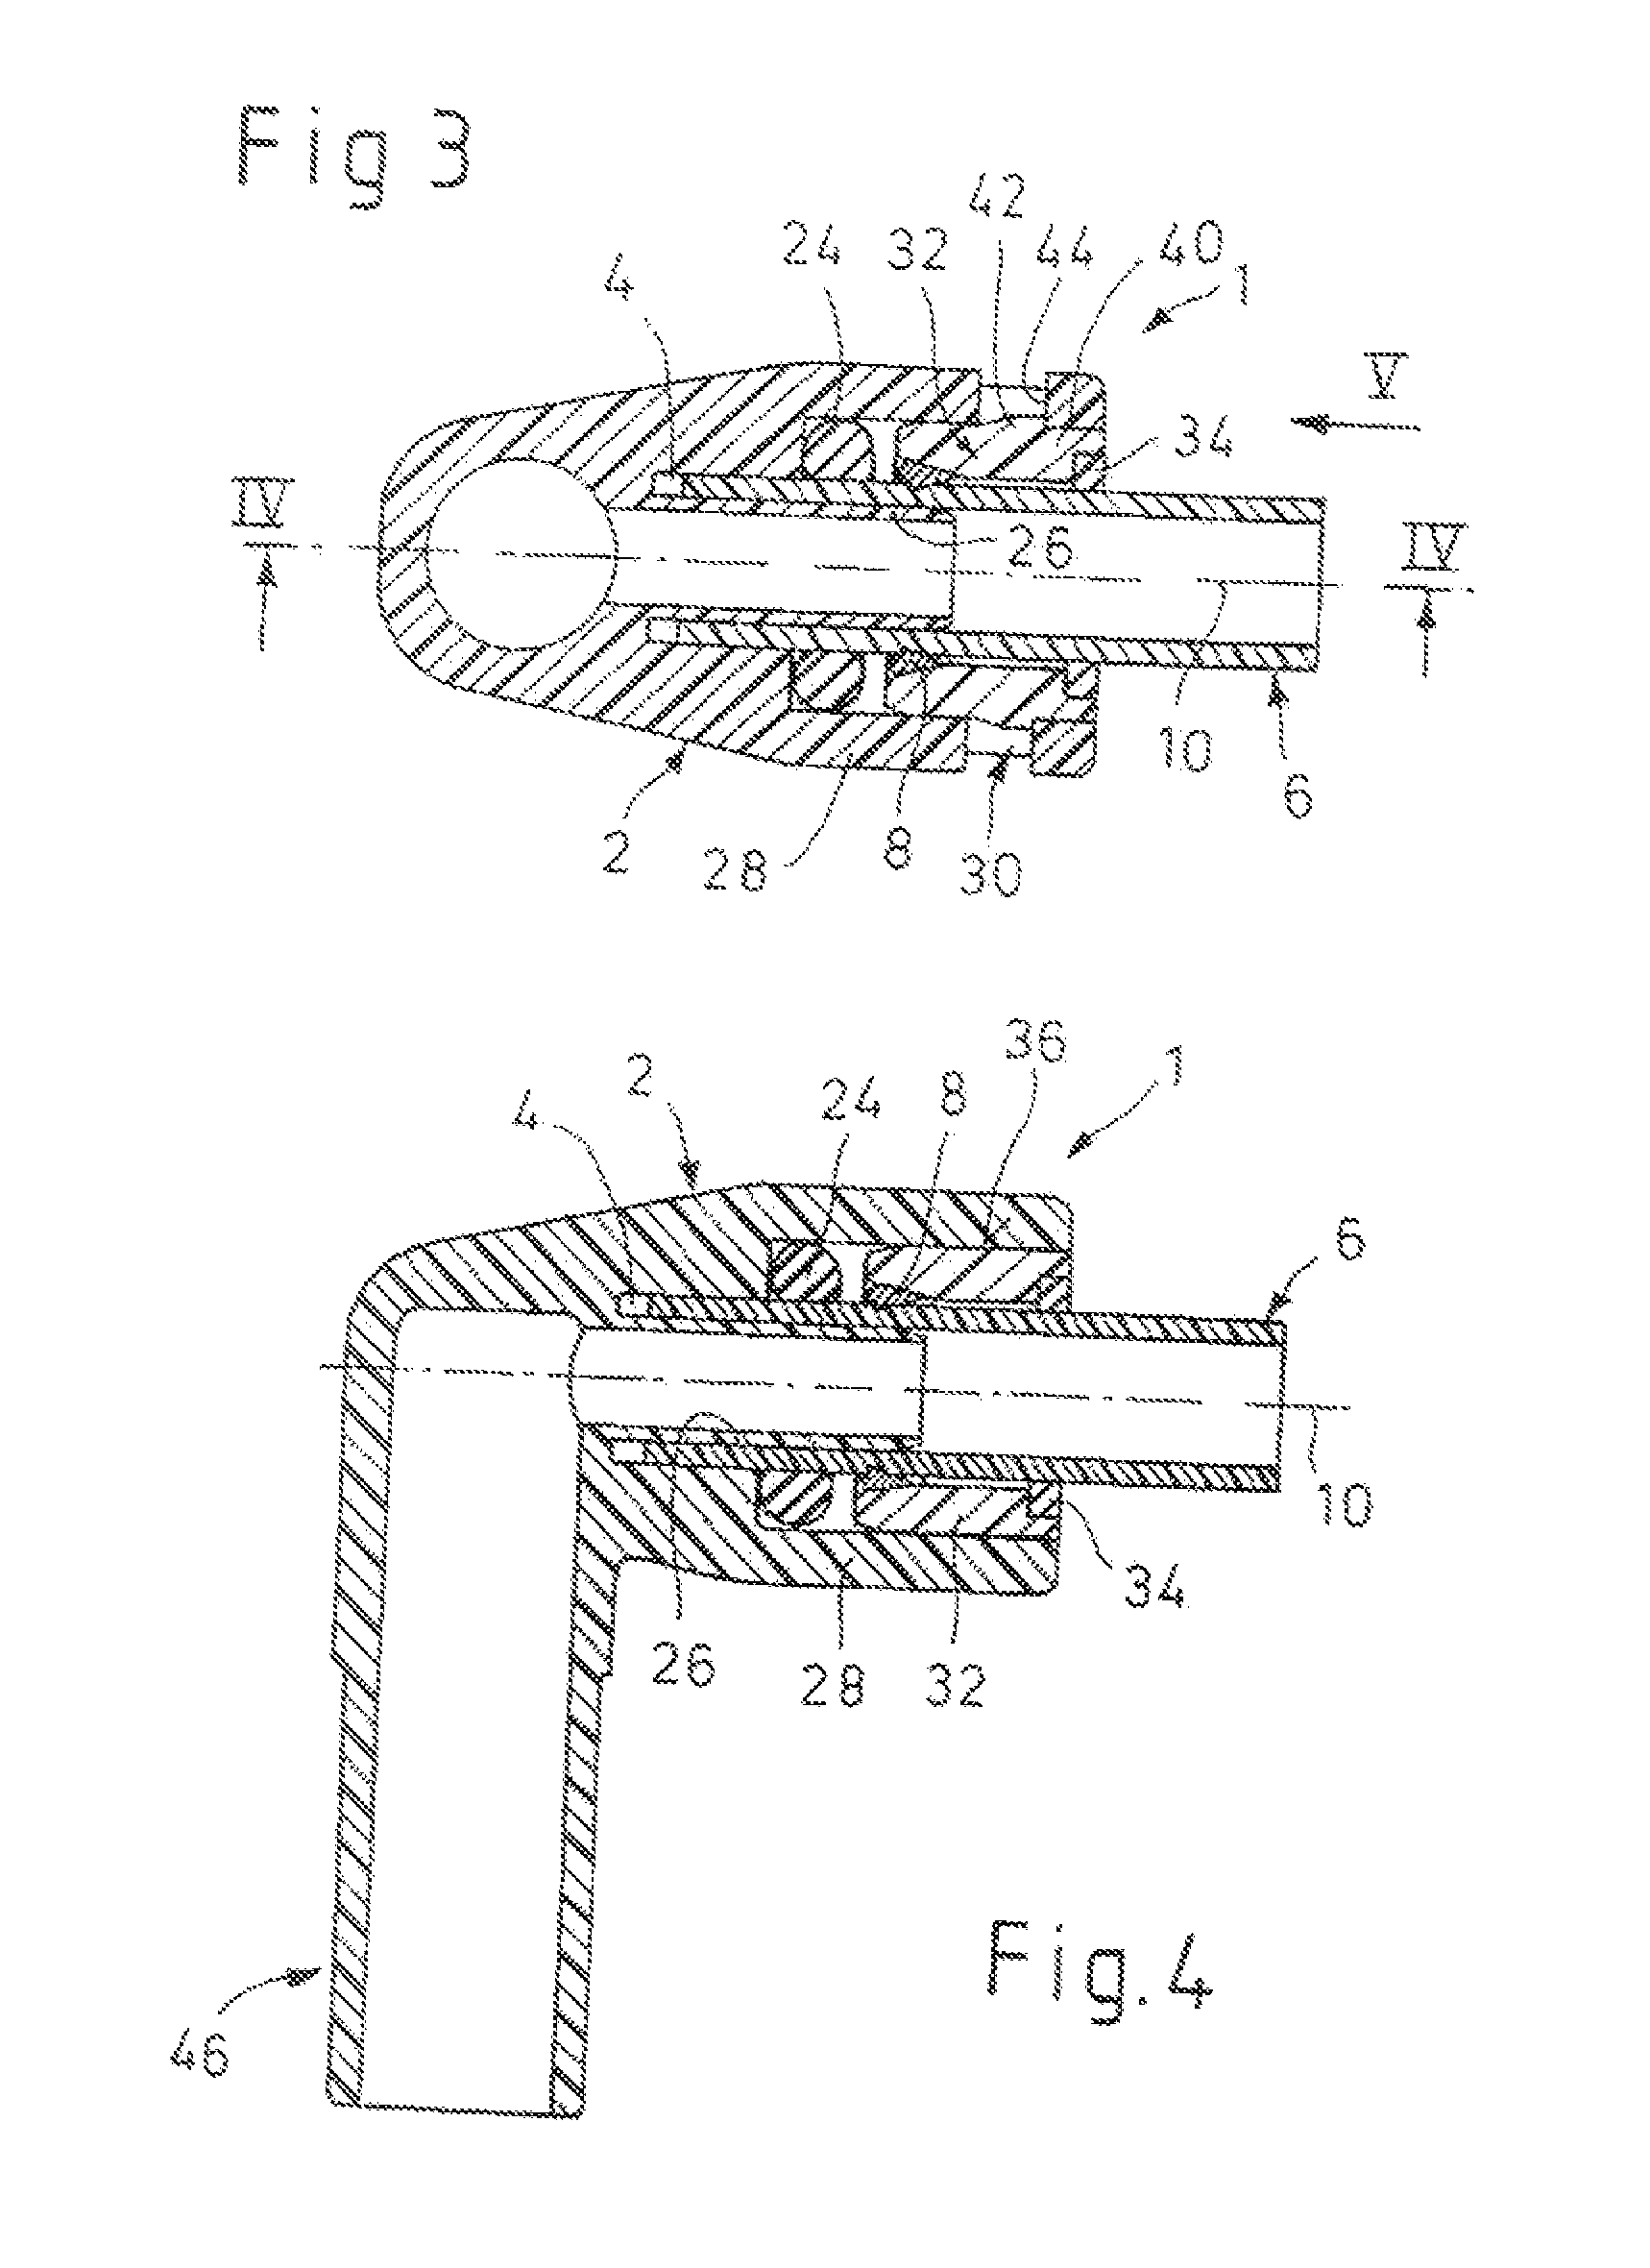 Connector device for pipes